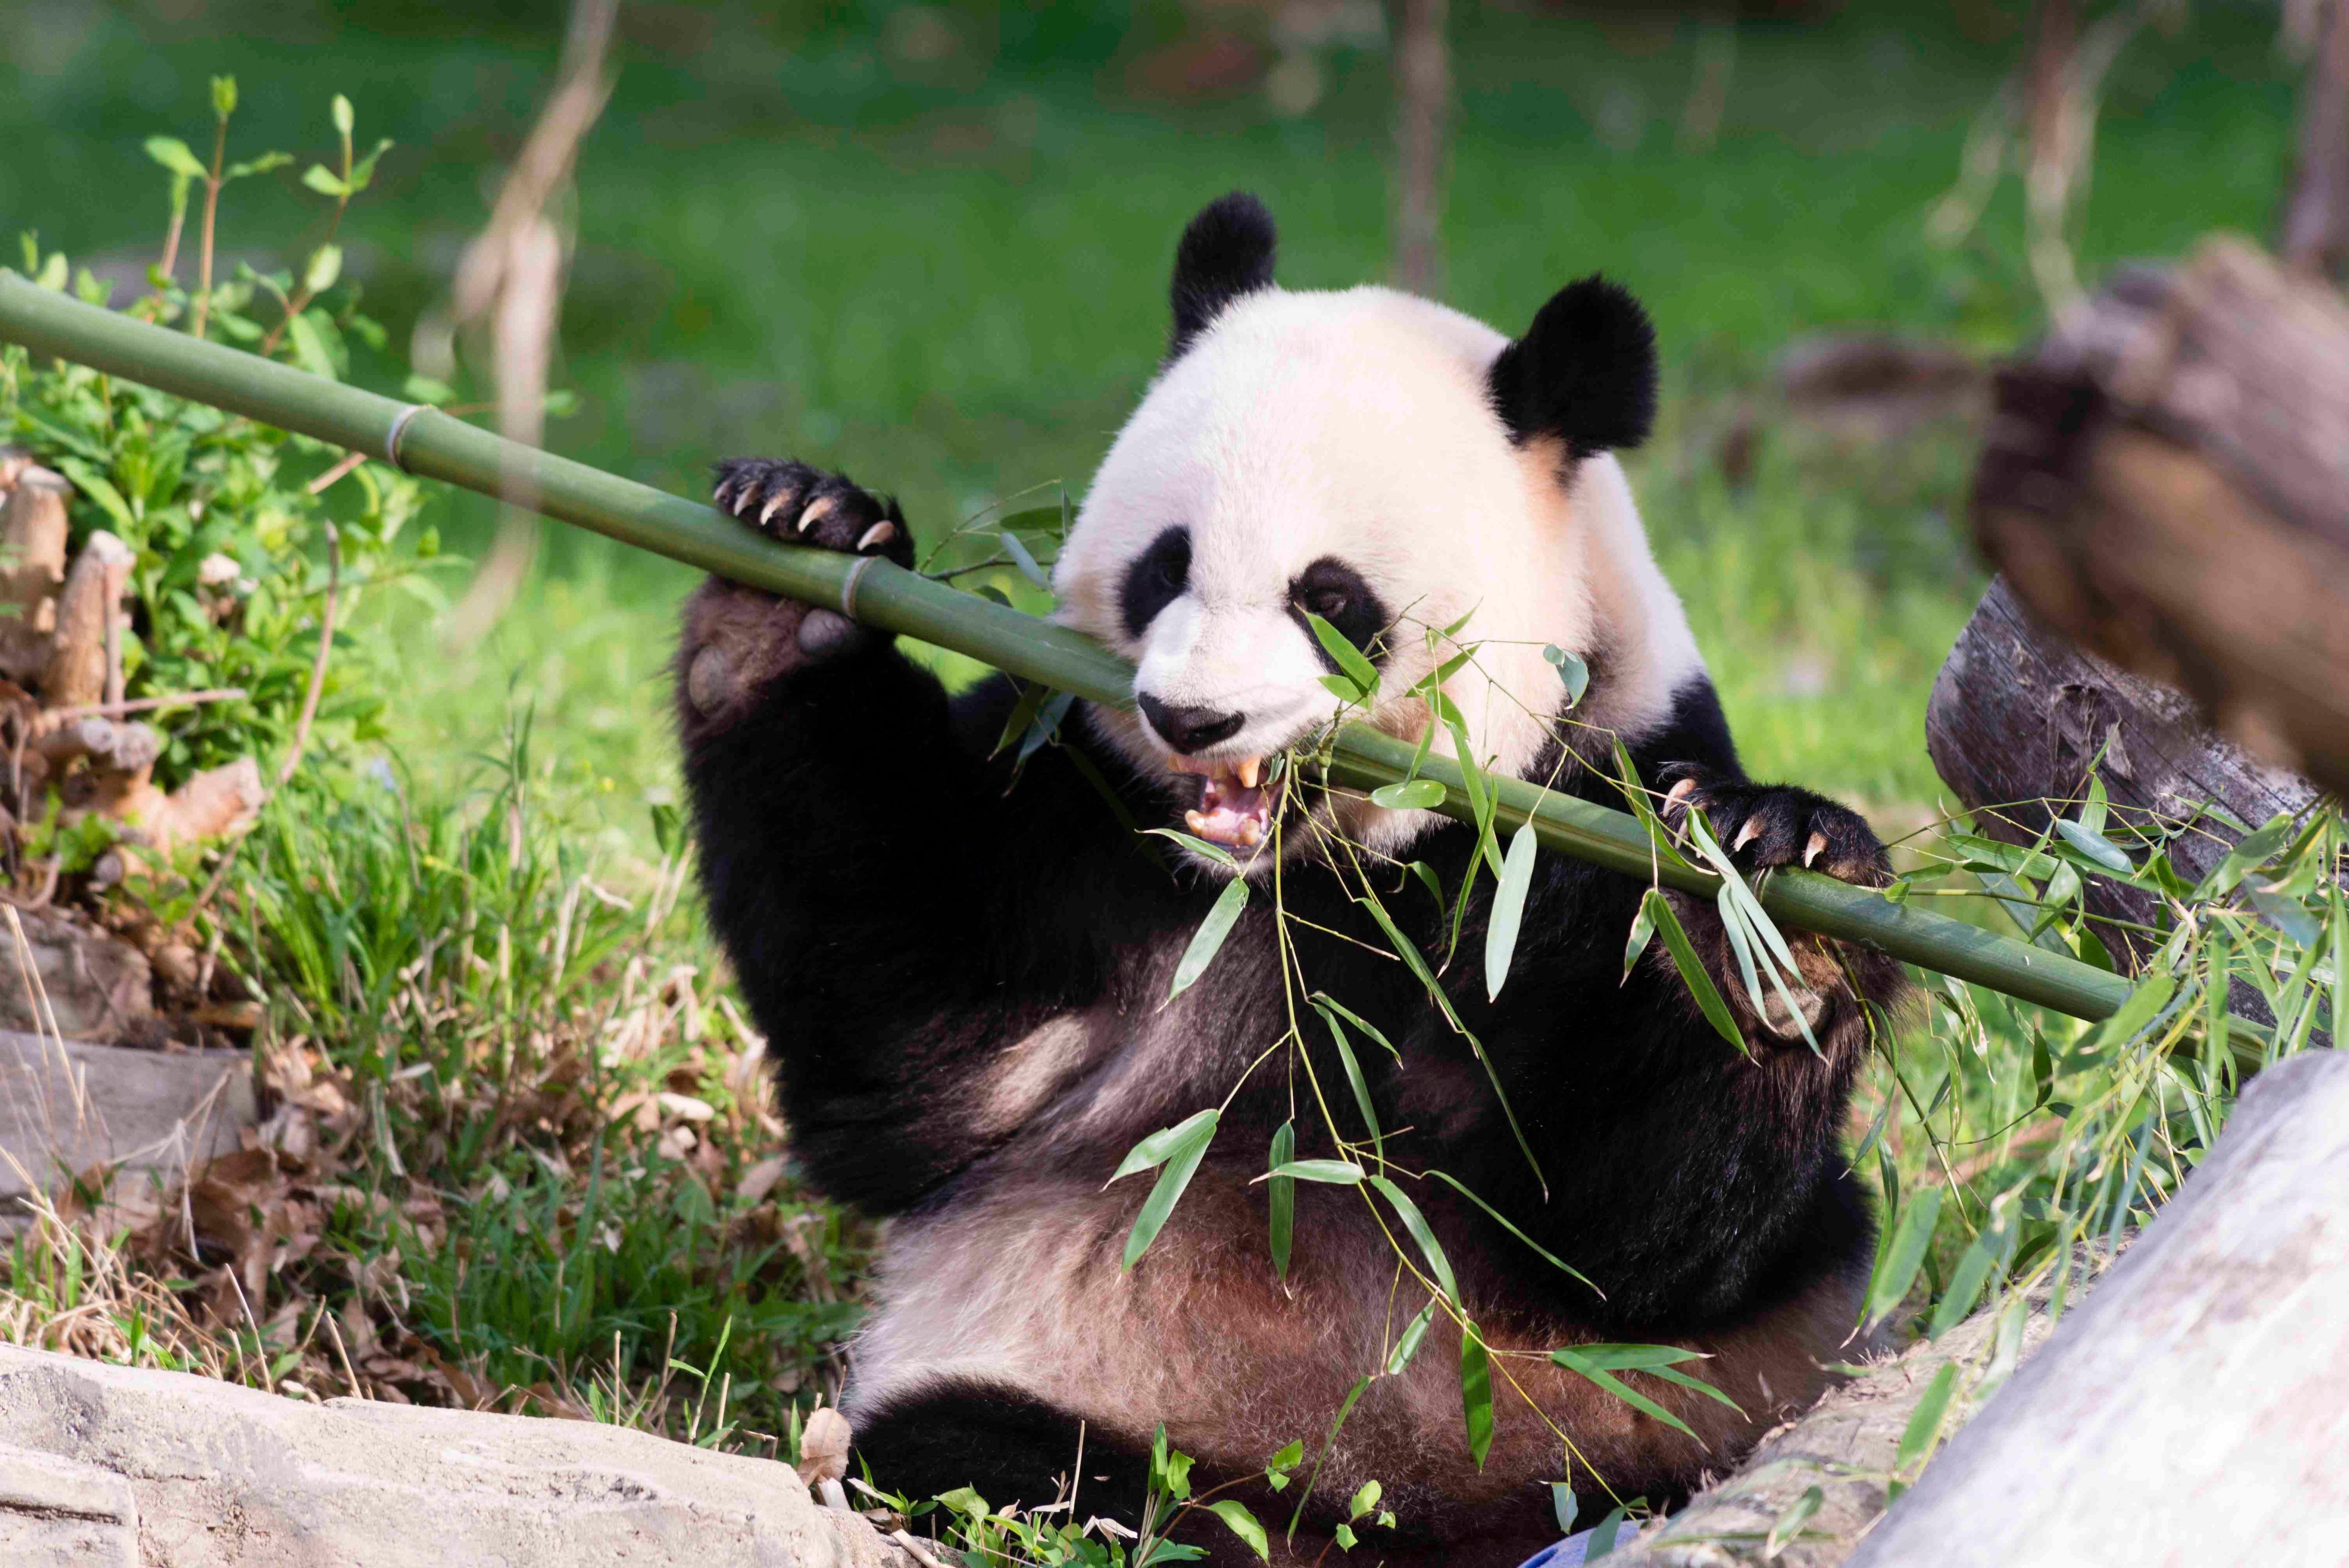 Giant Panda Mei Xiang snacks on bamboo at the Snithsonian's National Zoo in Washington on April 19, 2015. (Smithsonian's National Zoo—Reuters)